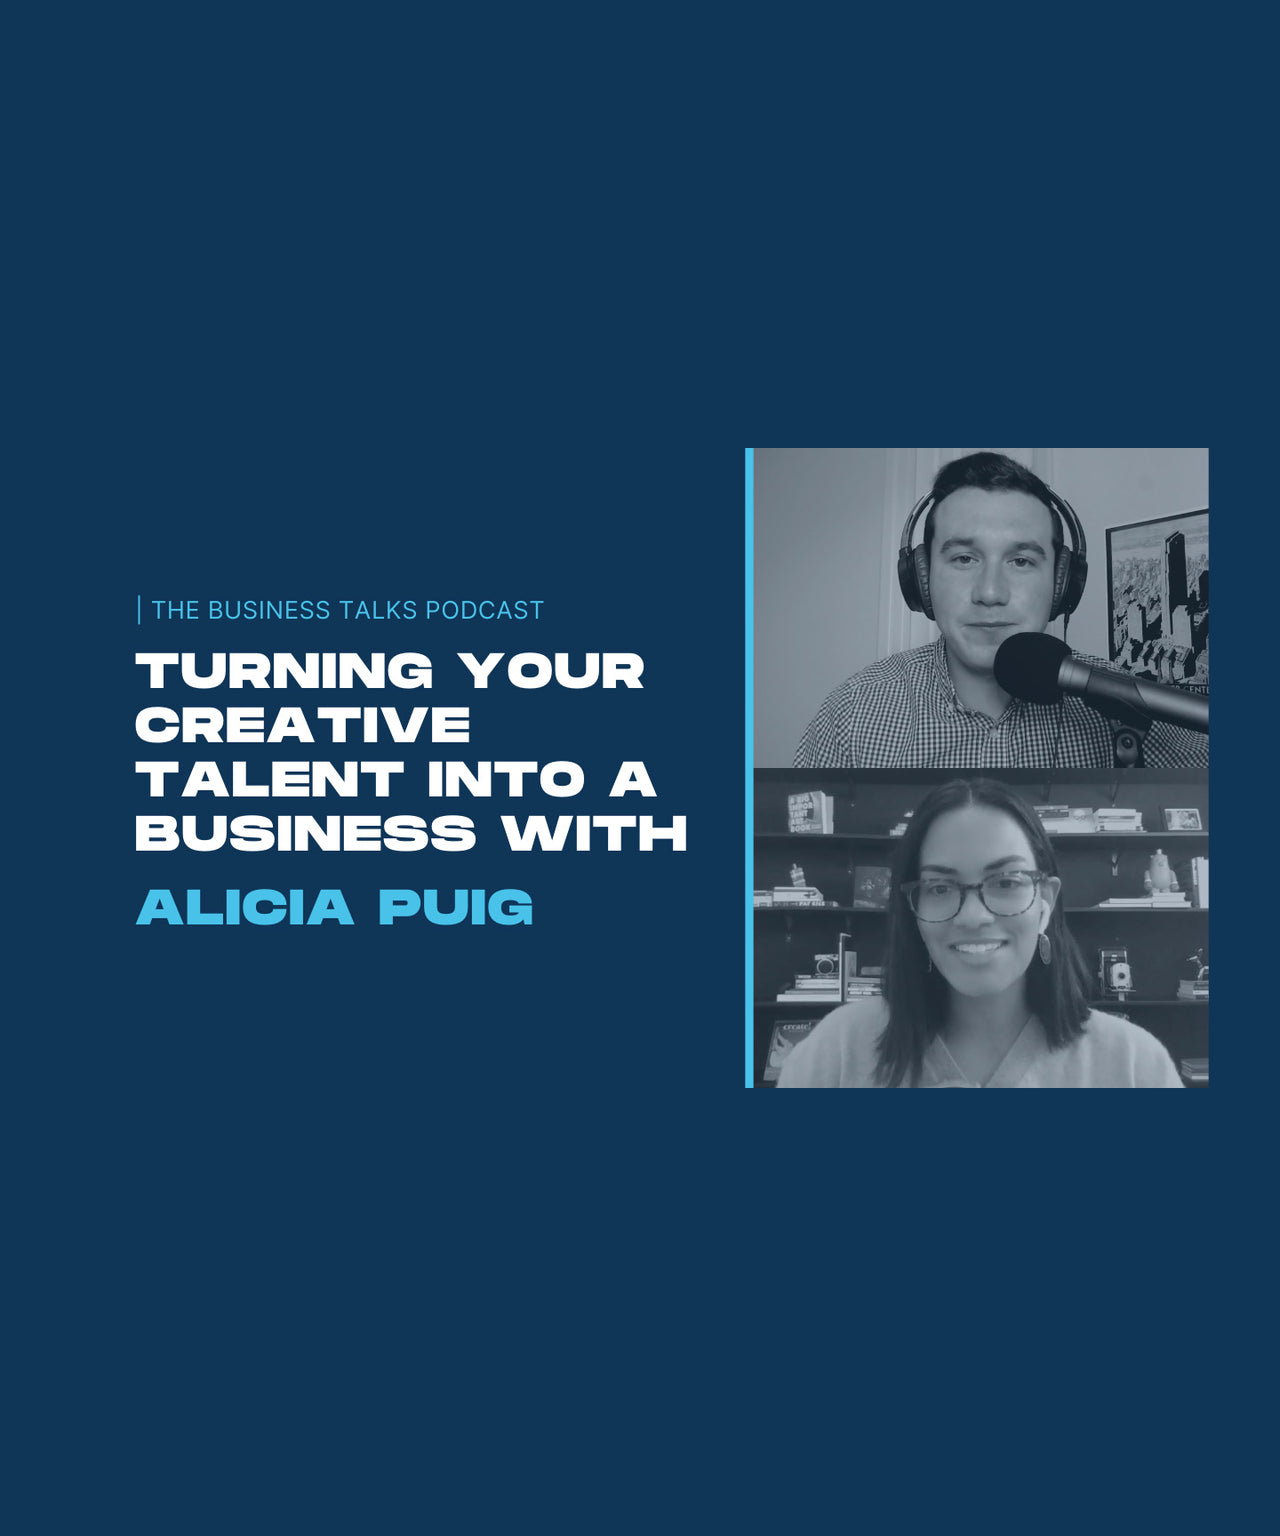 Turning Your Creative Talent Into A Business: Podcast Interview with Alicia